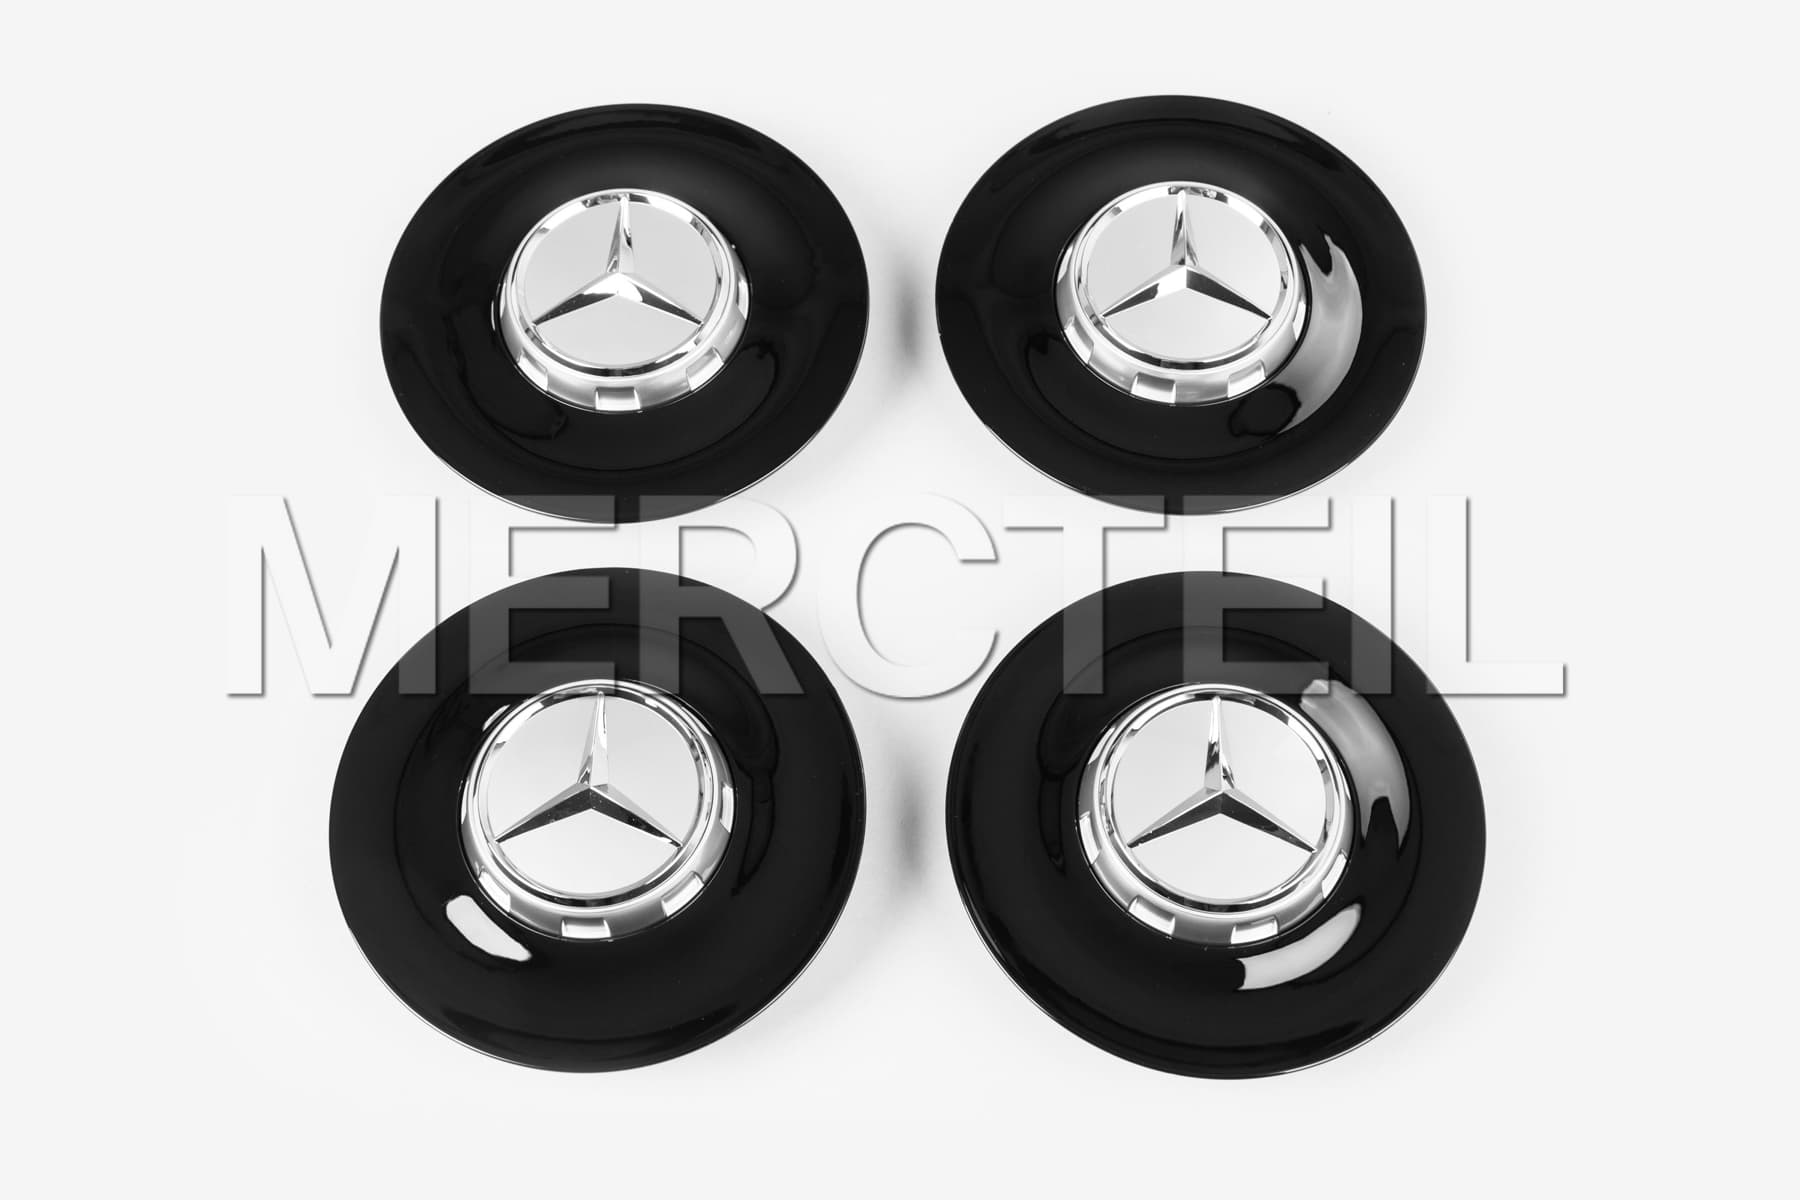 S Class 12 Spoke Alloy Wheel Hubcaps W222 Genuine Mercedes Benz (part number: A22240031009709)